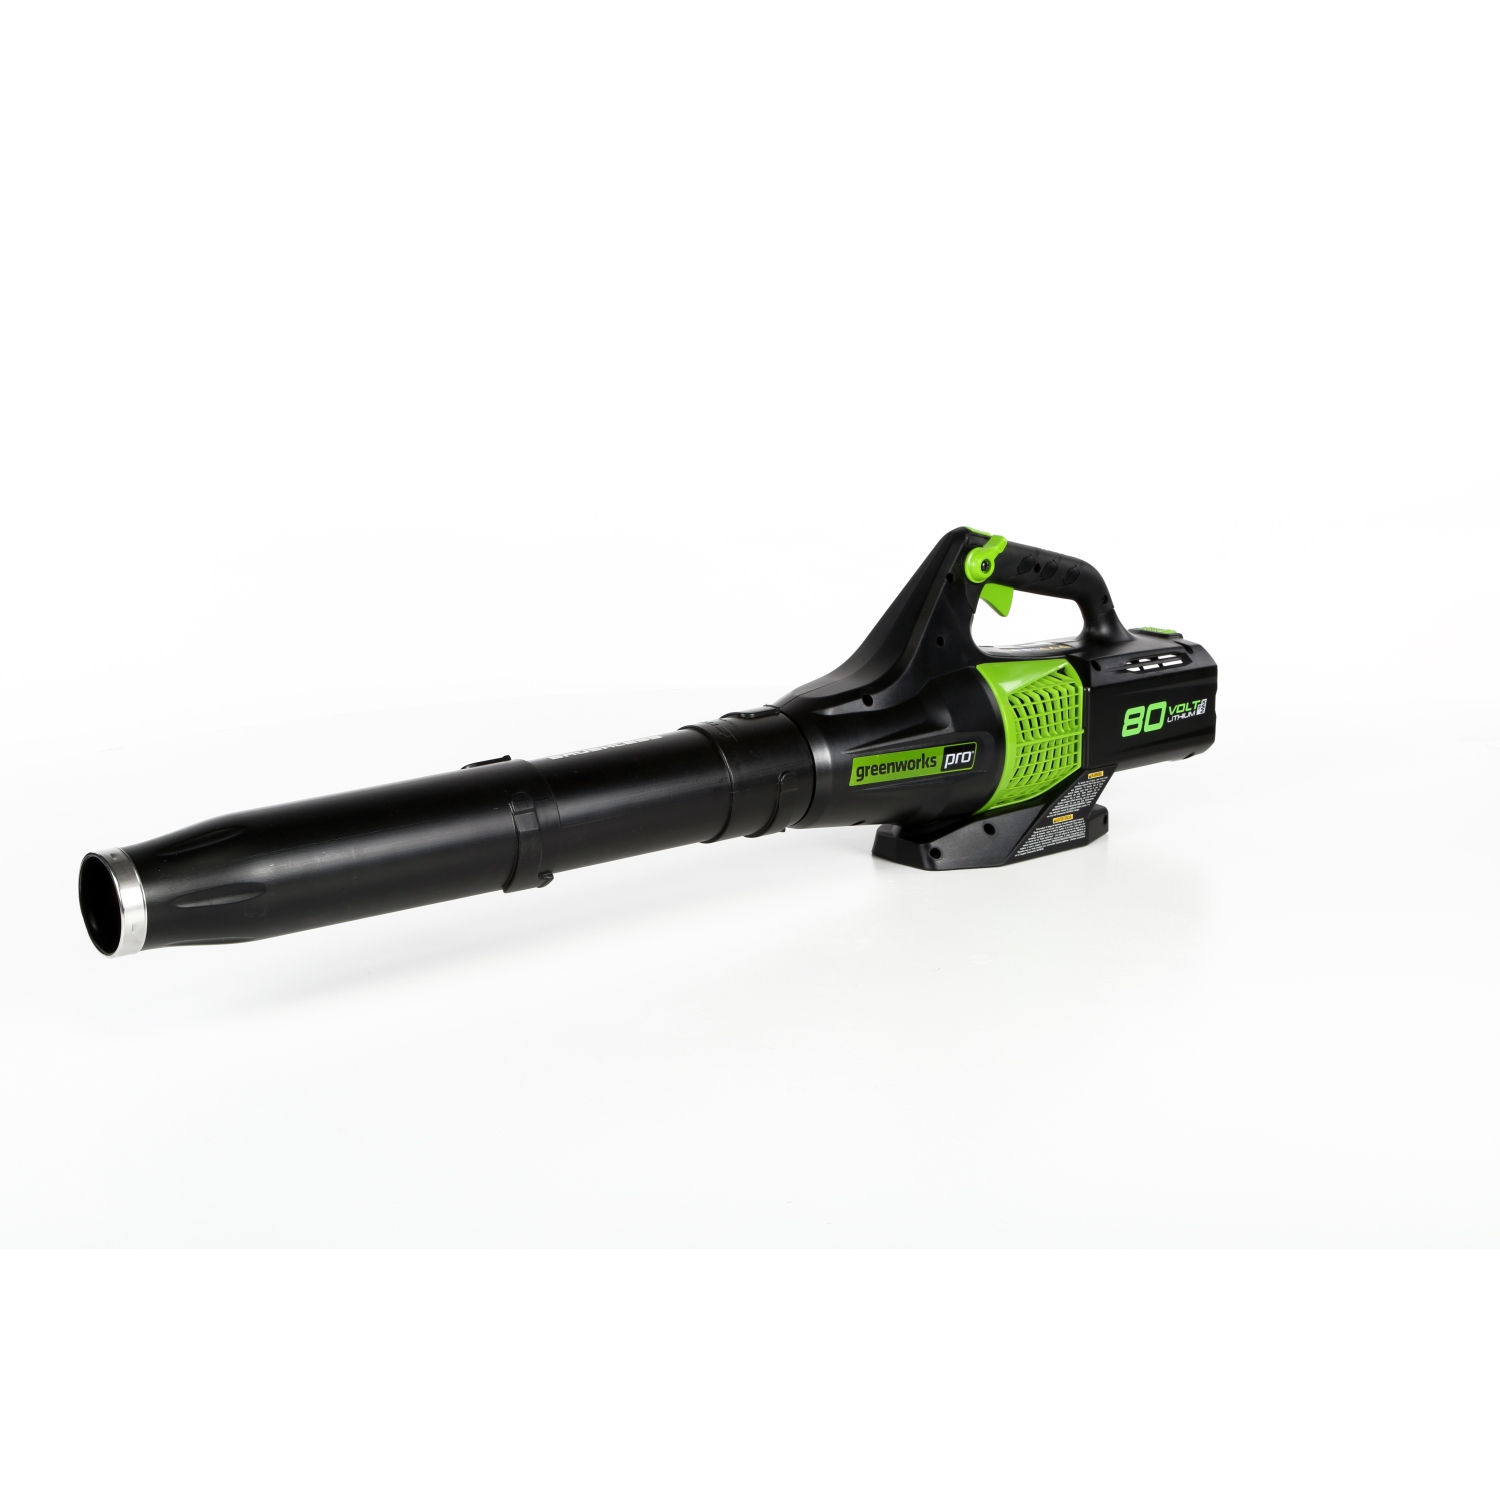 Greenworks PRO 80V 145 MPH - 580 CFM Brushless Axial Blower (Tool Only) - BL80L00